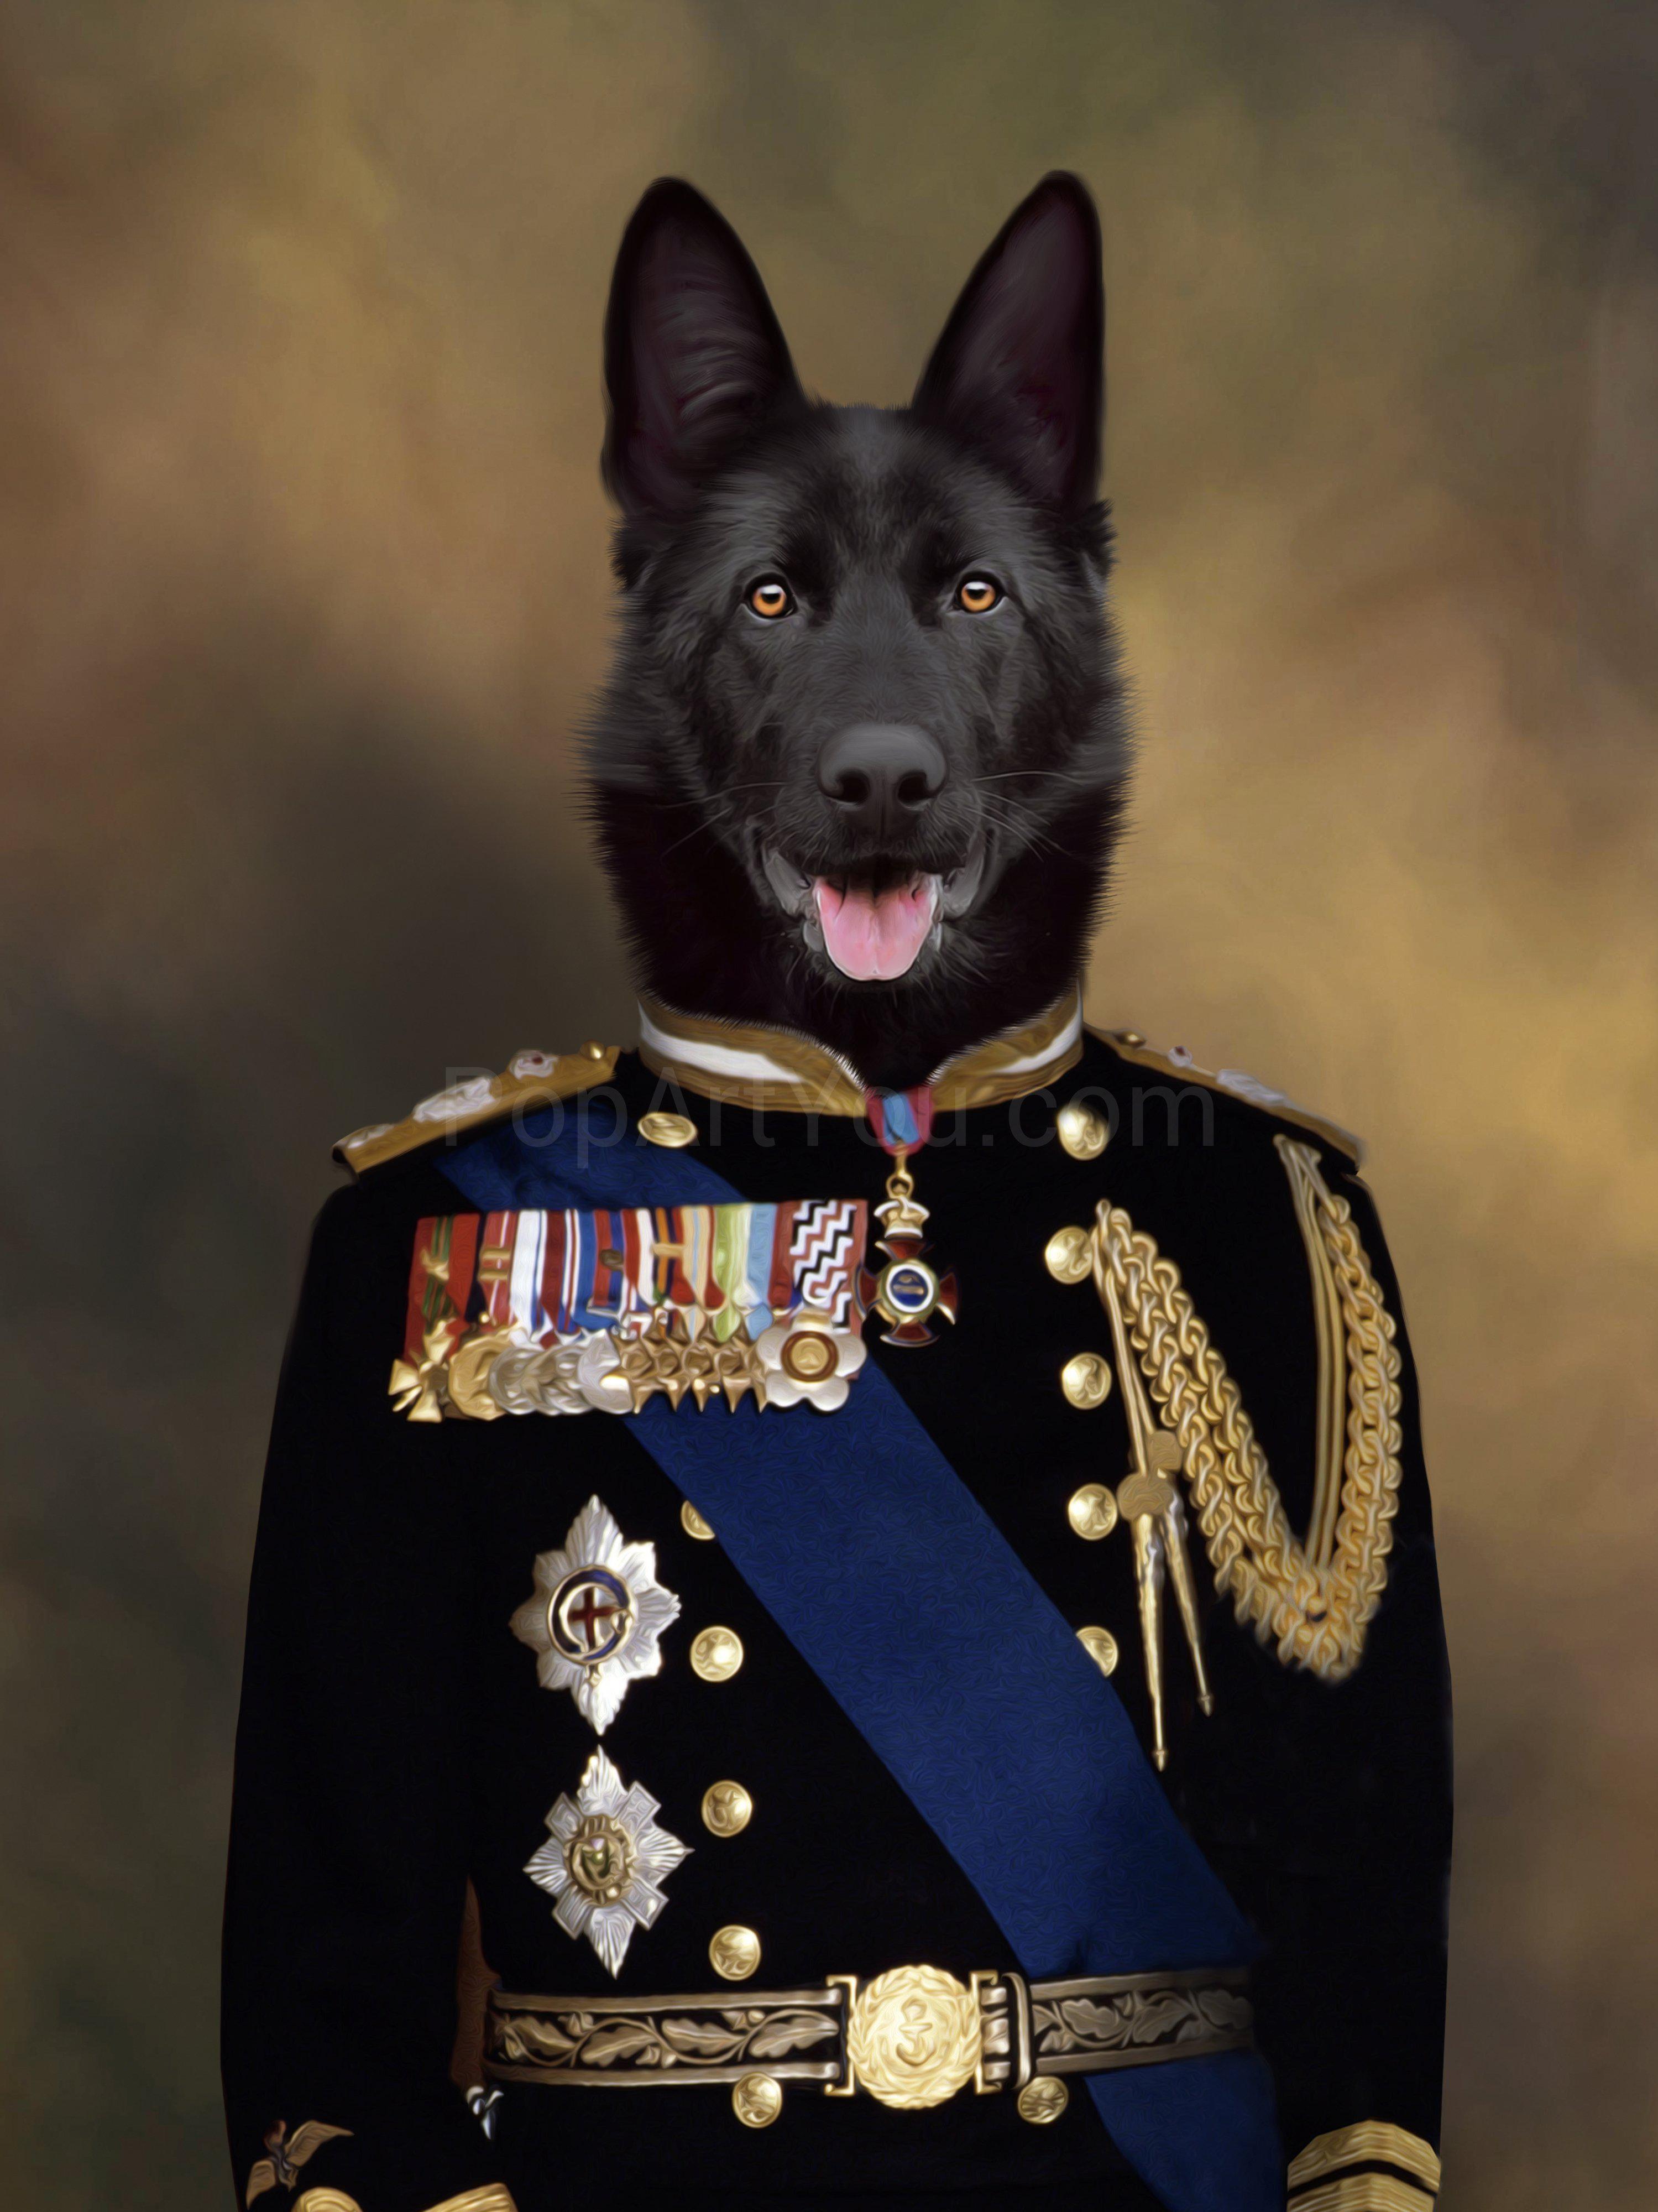 Personalized portrait of a dog with a human body, dressed as a veteran